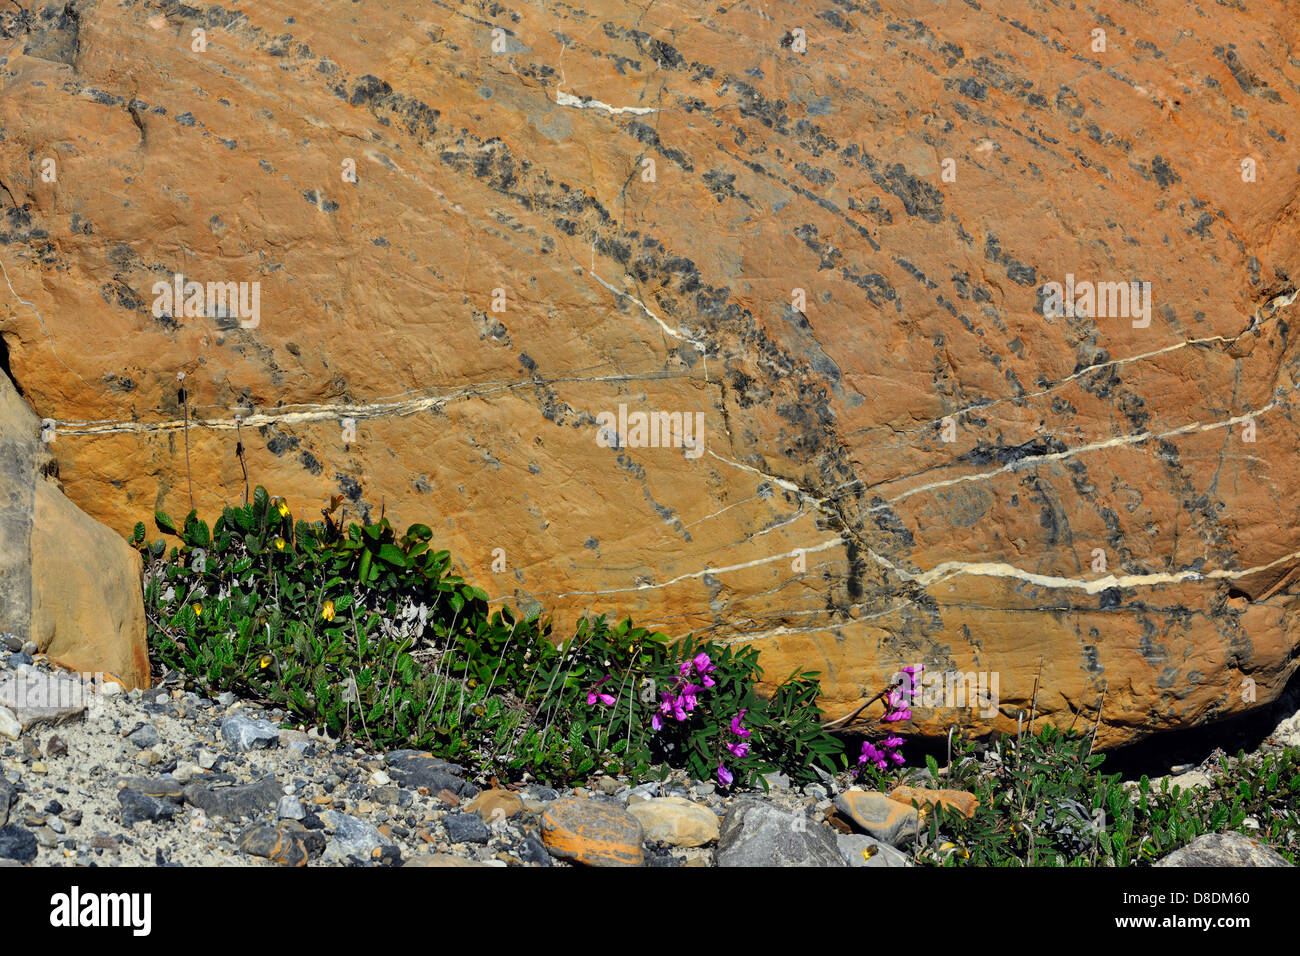 Sweetvetch (Hedysarum boreale) growing in Columbia Icefields glacial moraine Jasper National Park, Alberta, Canada Stock Photo